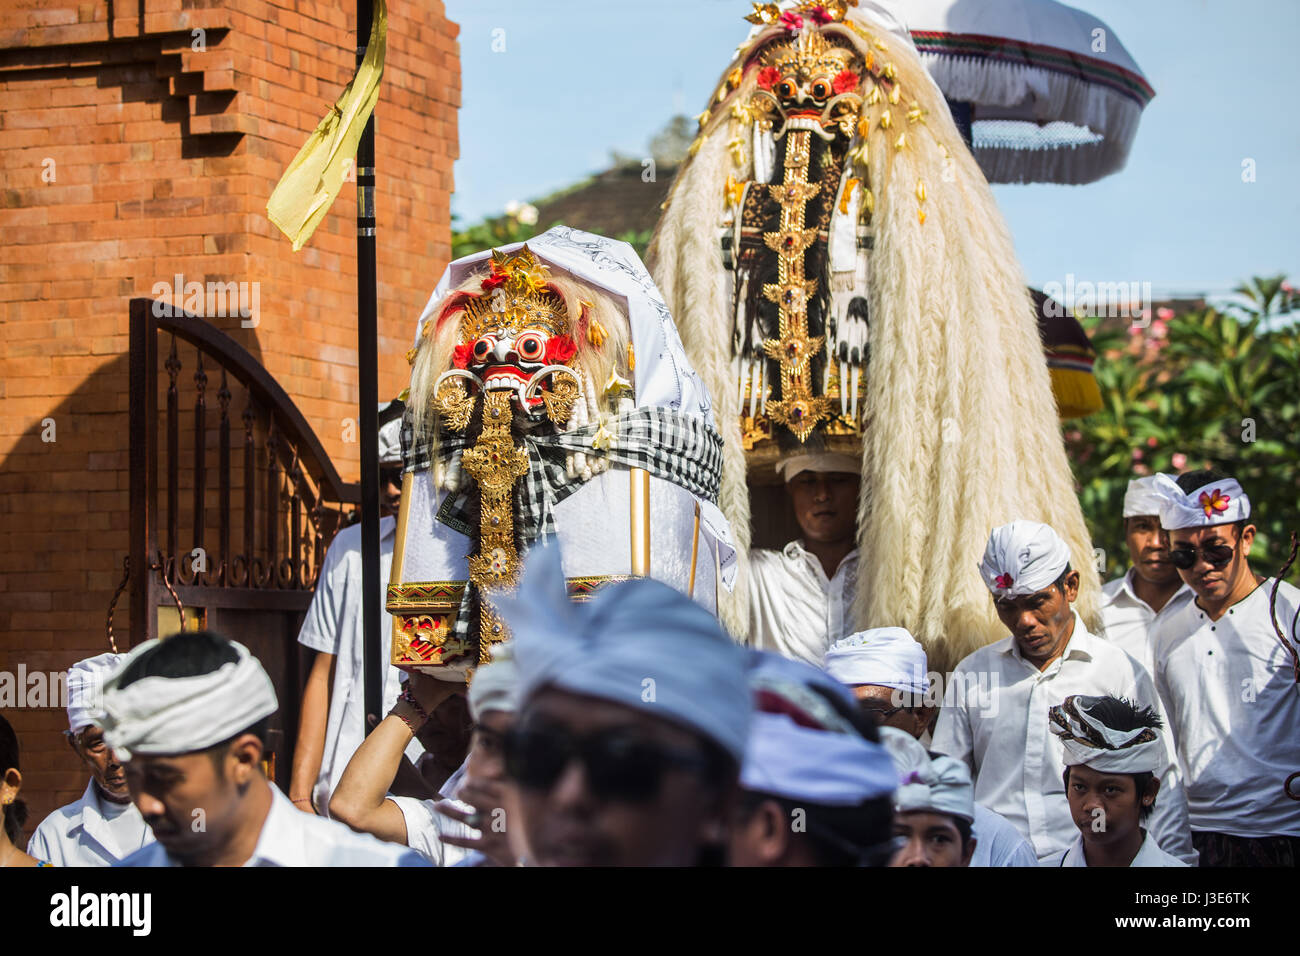 Masked men in scary Rangda costumes the demon queen of the witches are carried into a Bali ceremony surrounded by hordes of Balinese Hindu devotees Stock Photo